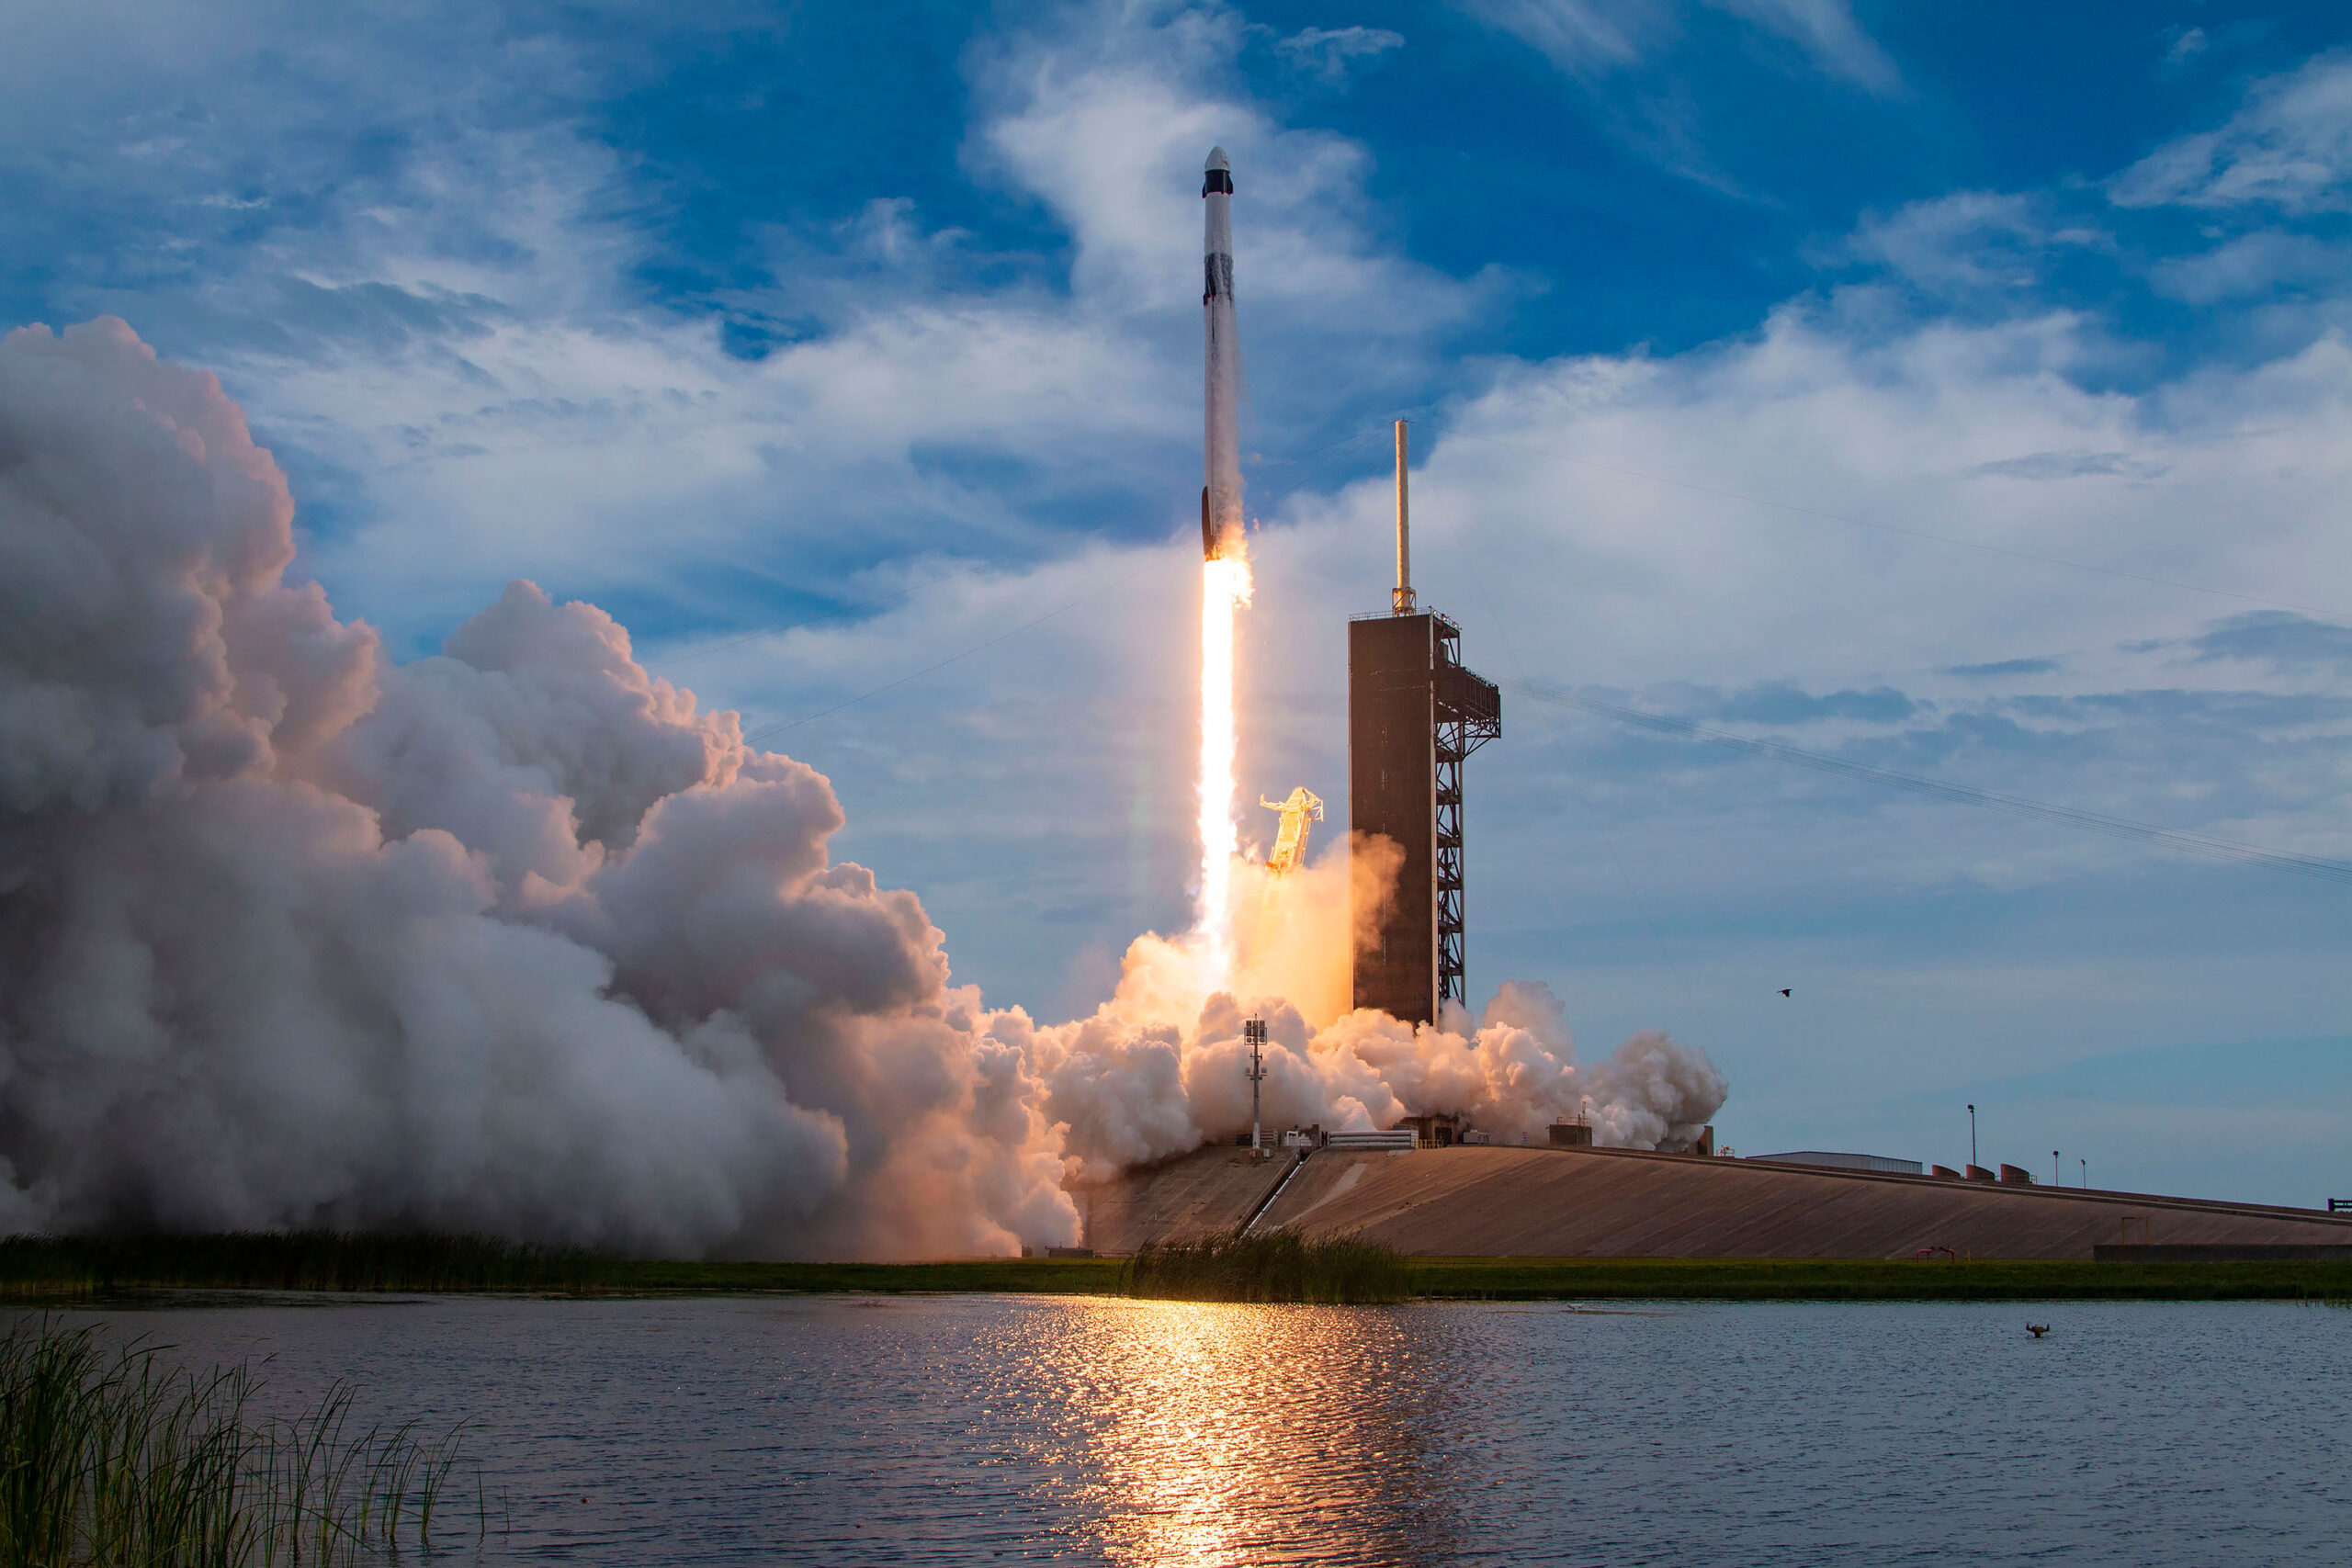 Watch Nasa Spacex Successfully Launch Axiom Space Mission 2 From Ksc Docking With Iss Harmony